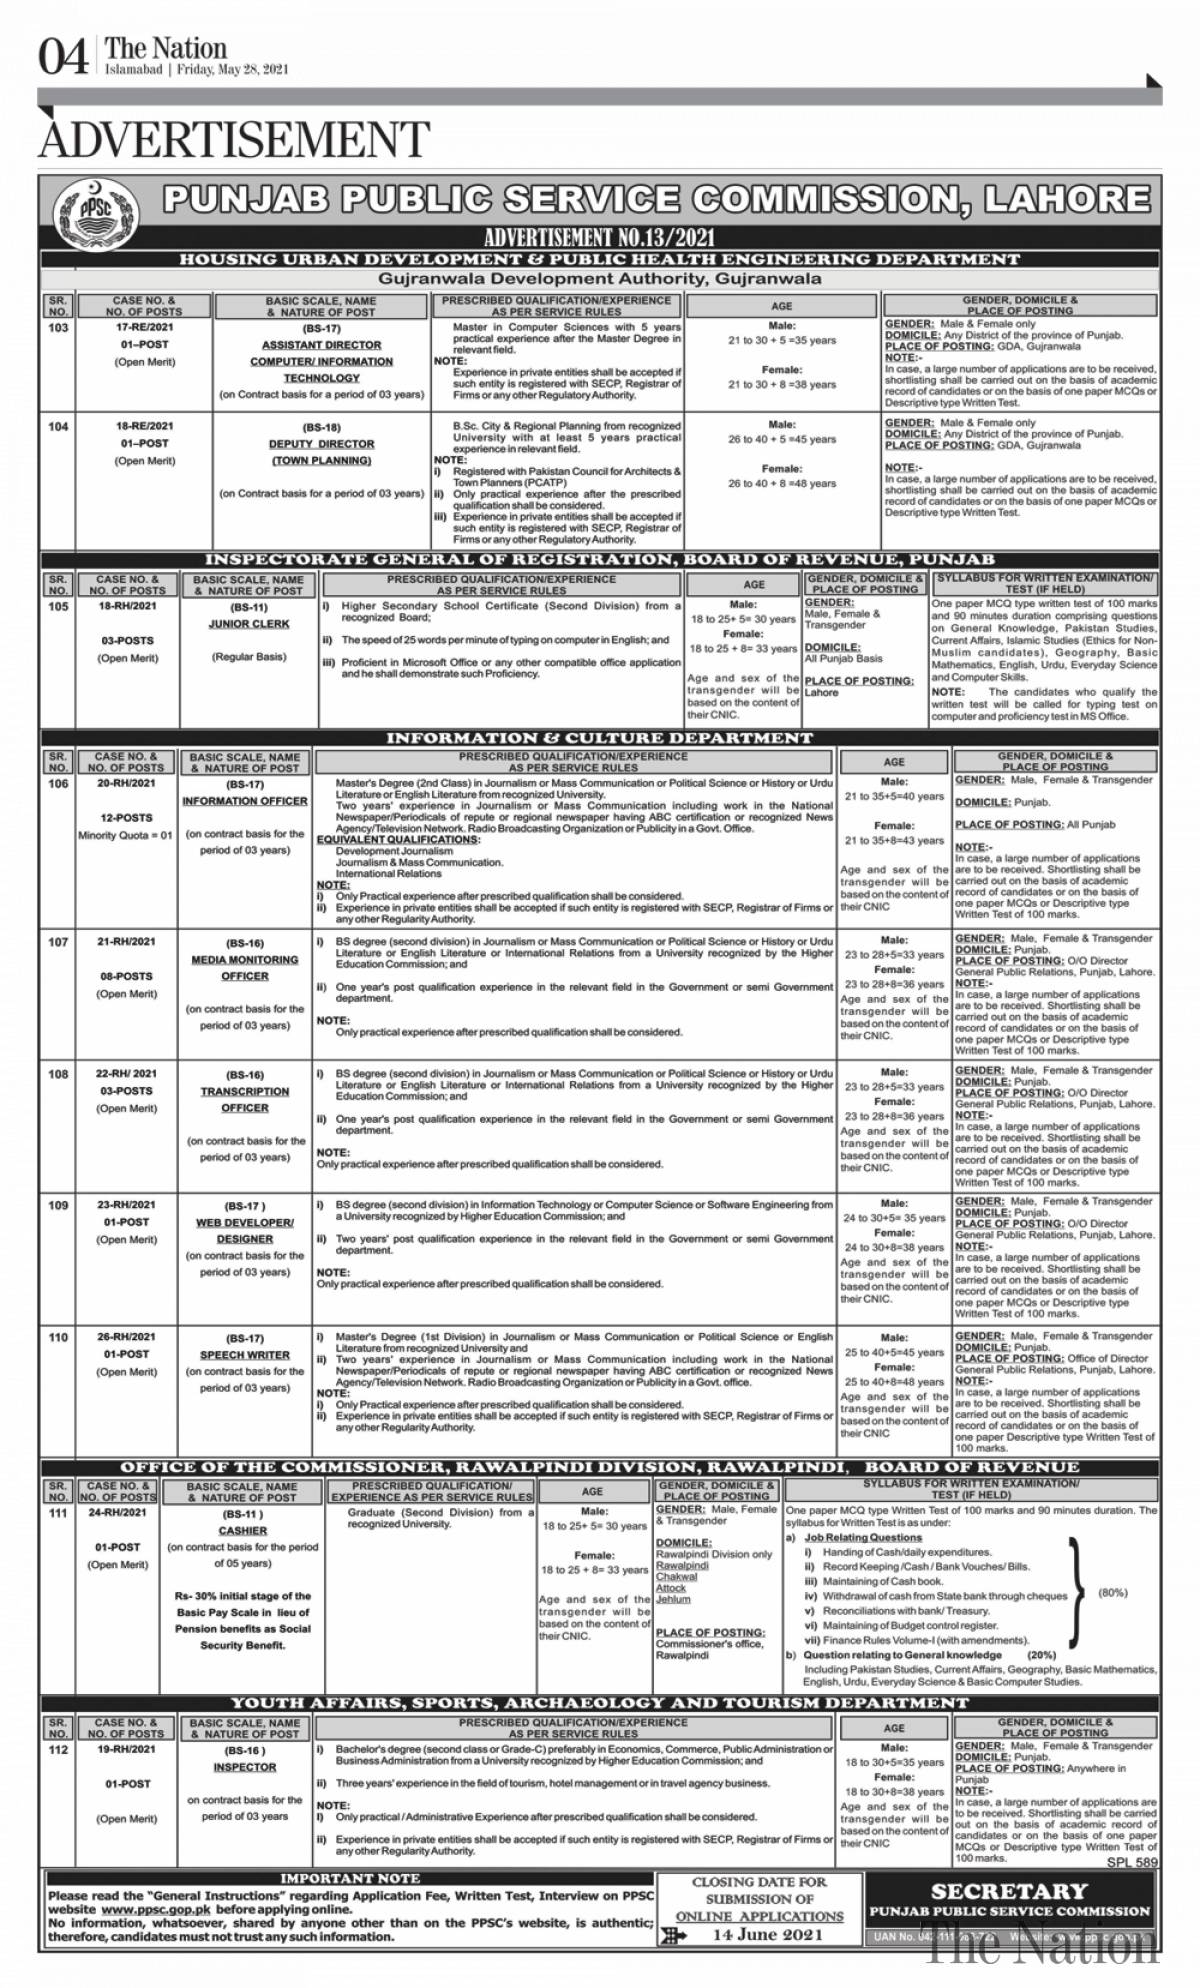 Latest Jobs in  Punjab Public Service Commission Jobs, Published today in The Nation Newspaper for Jobs through Punjab Public Service Commission PPSC.